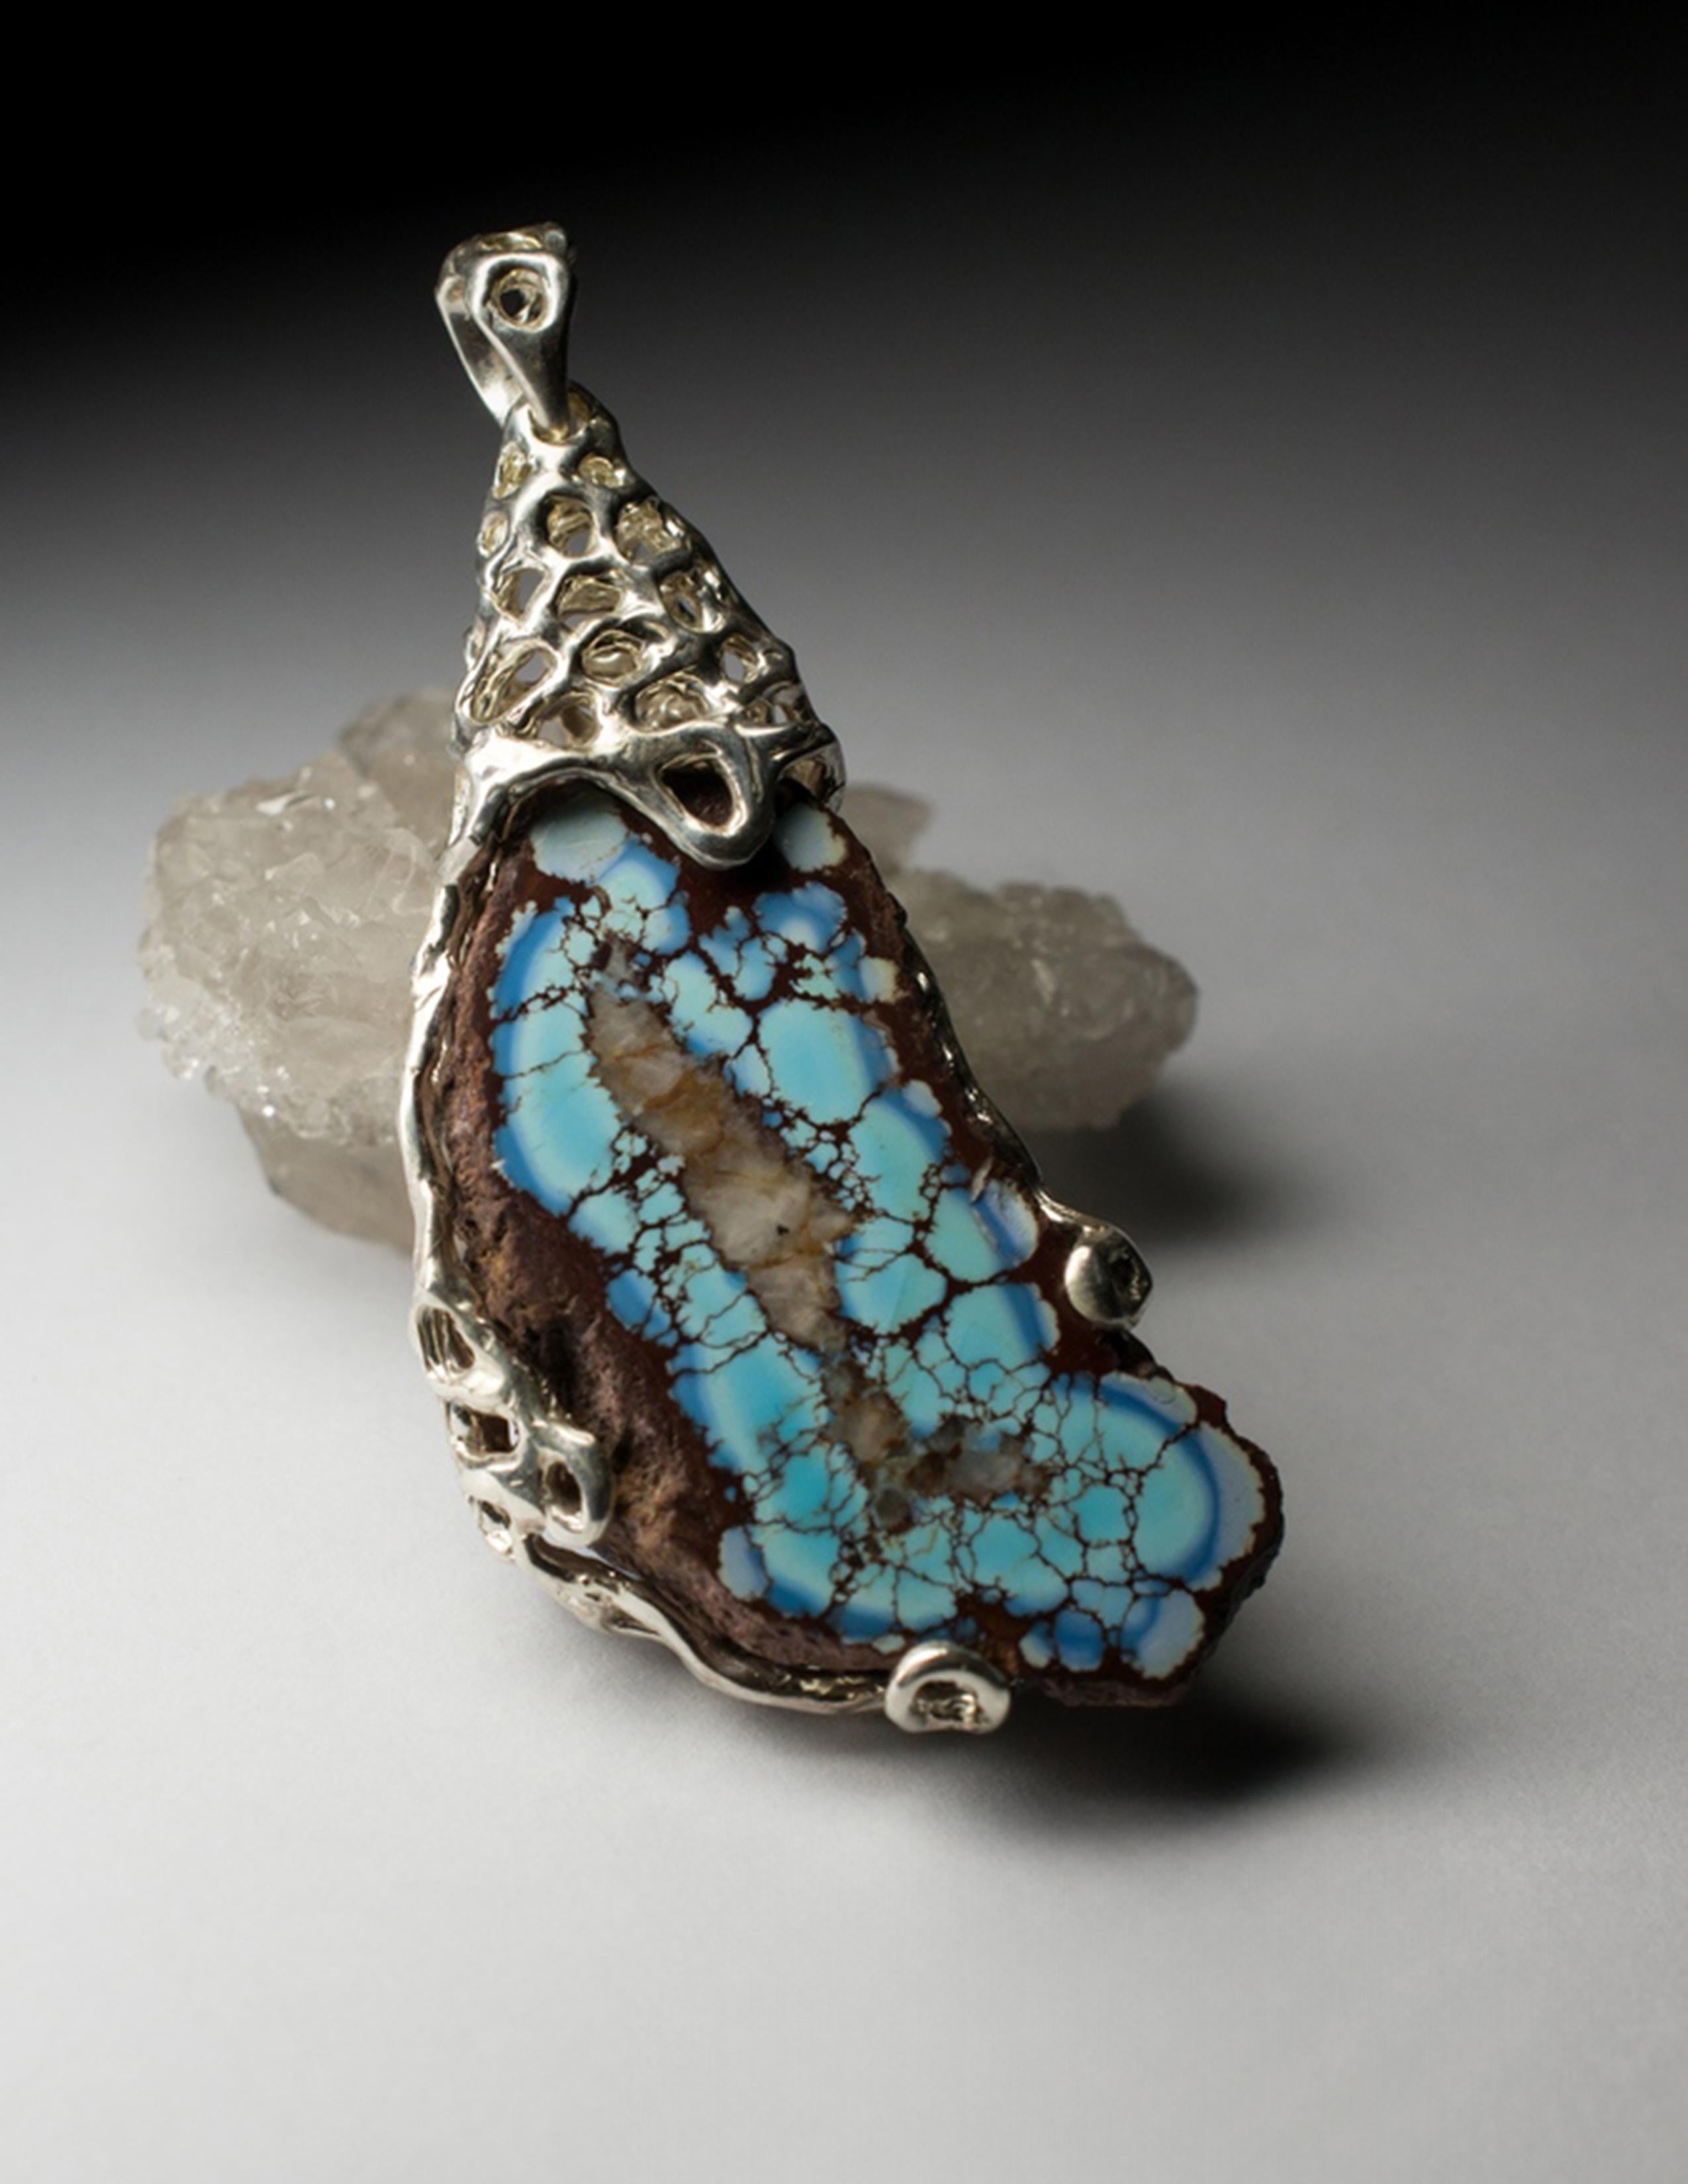 Turquoise Silver Pendant Raw Uncut Polychrome Patterned Natural Vintage Gemstone For Sale 3